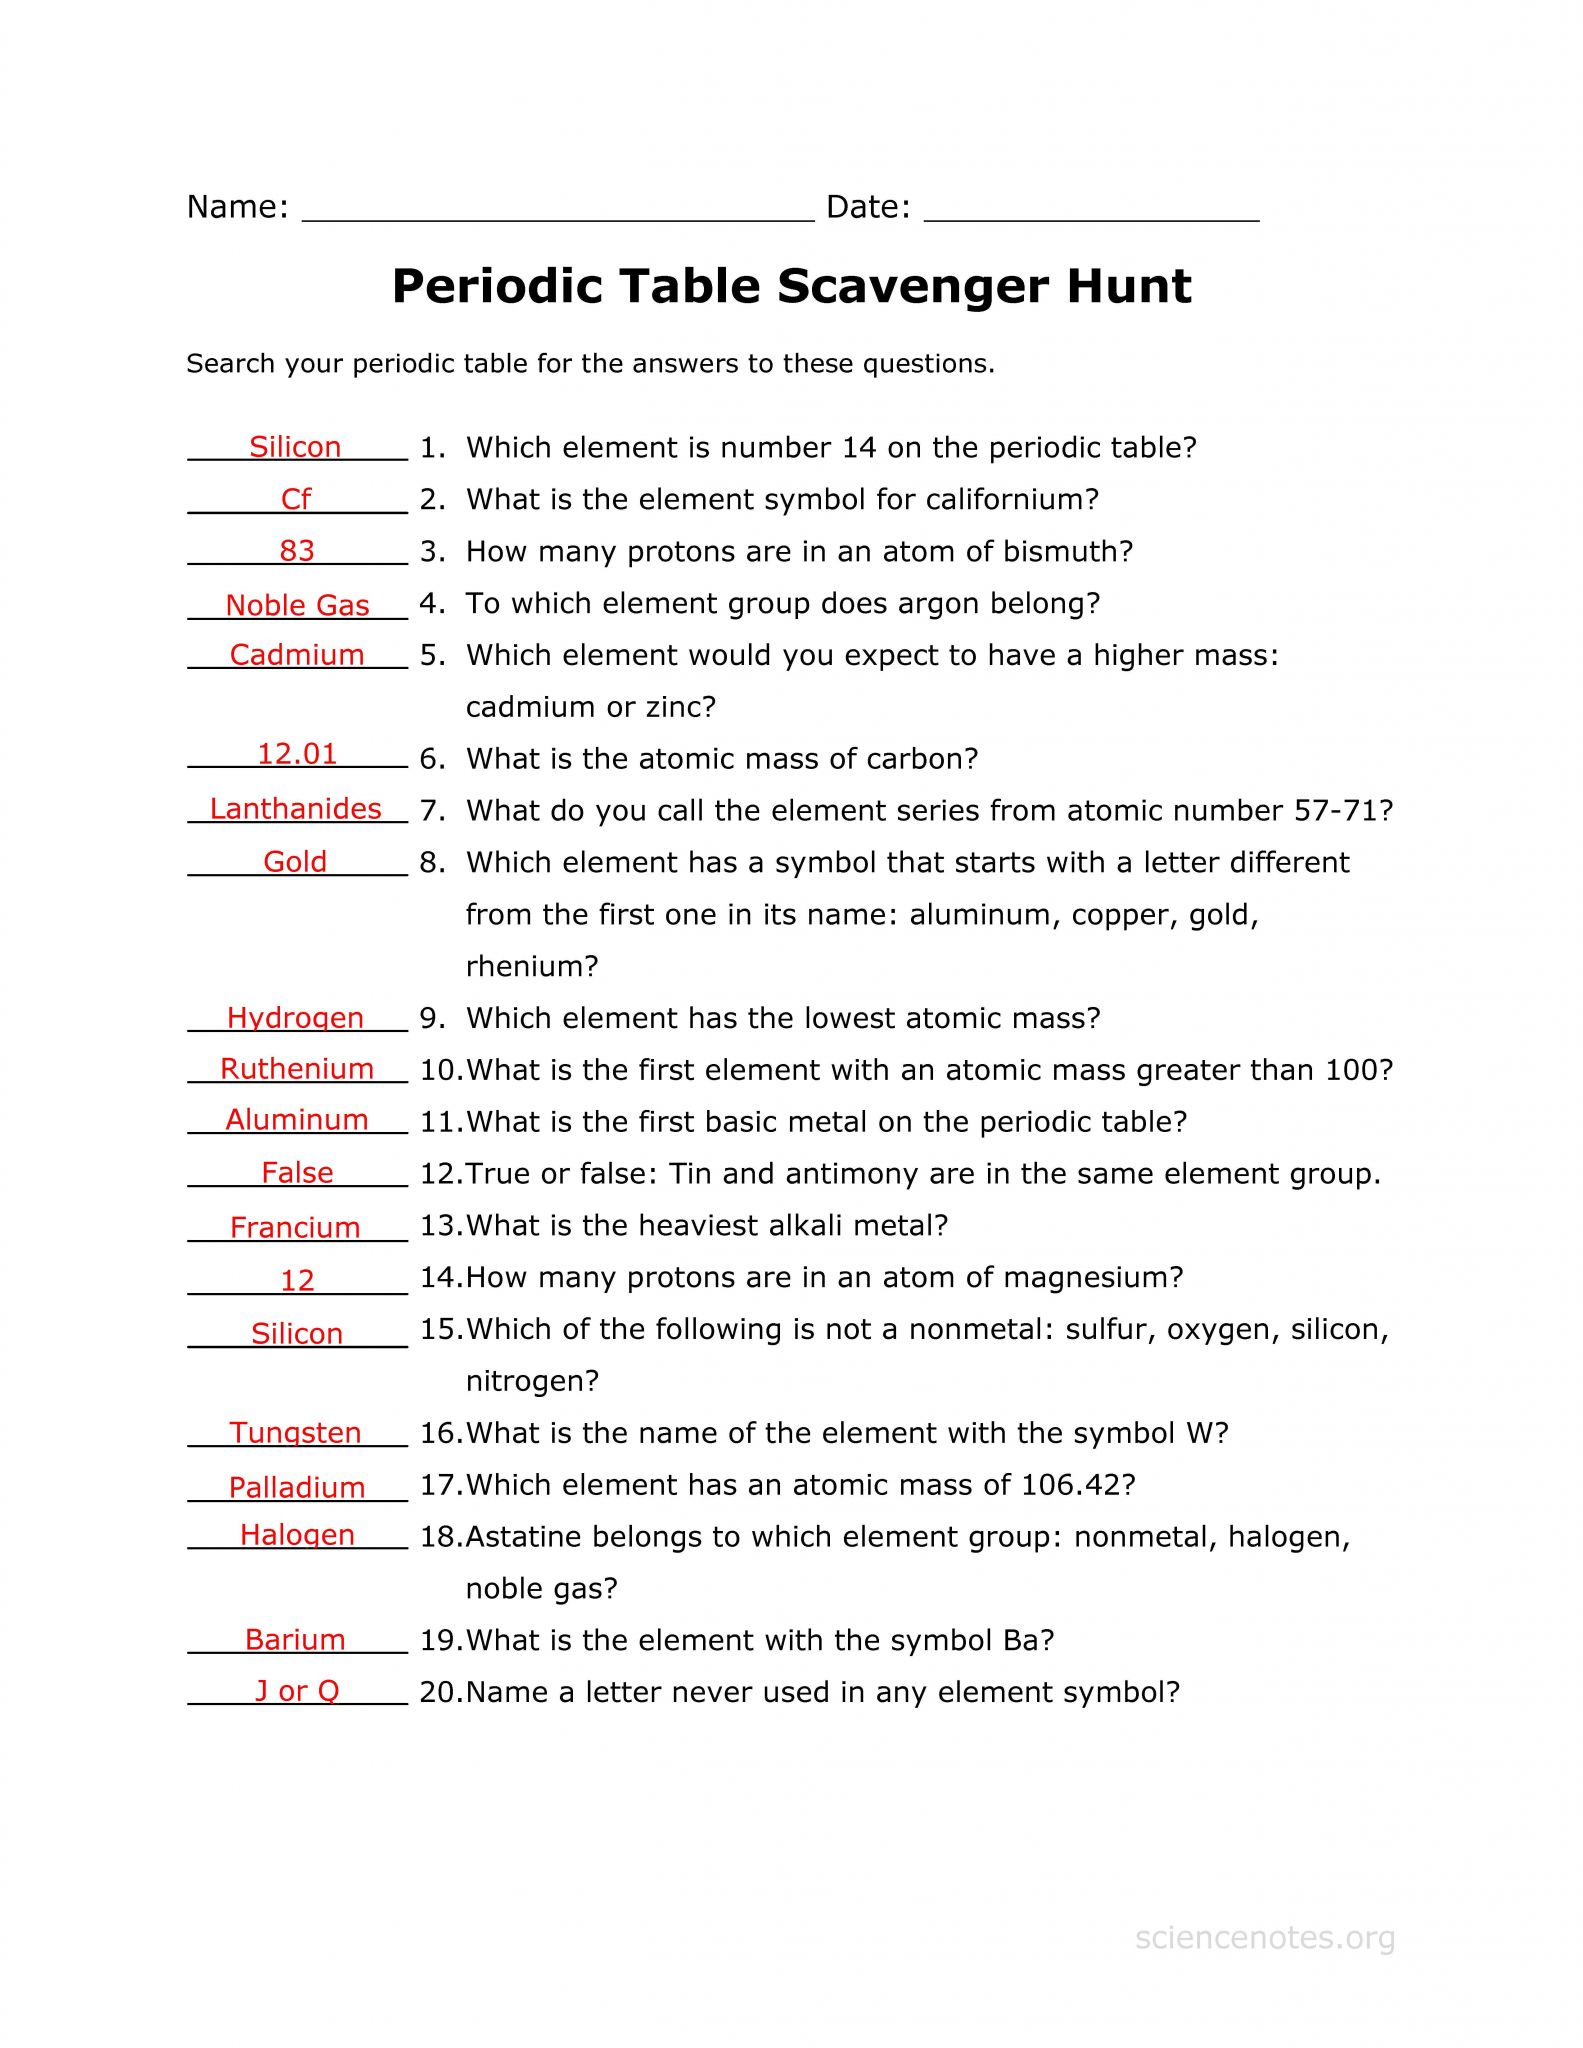 Atomic Structure Worksheet Answers Chemistry and Answer Key to the Periodic Table Scavenger Hunt Worksheet Related